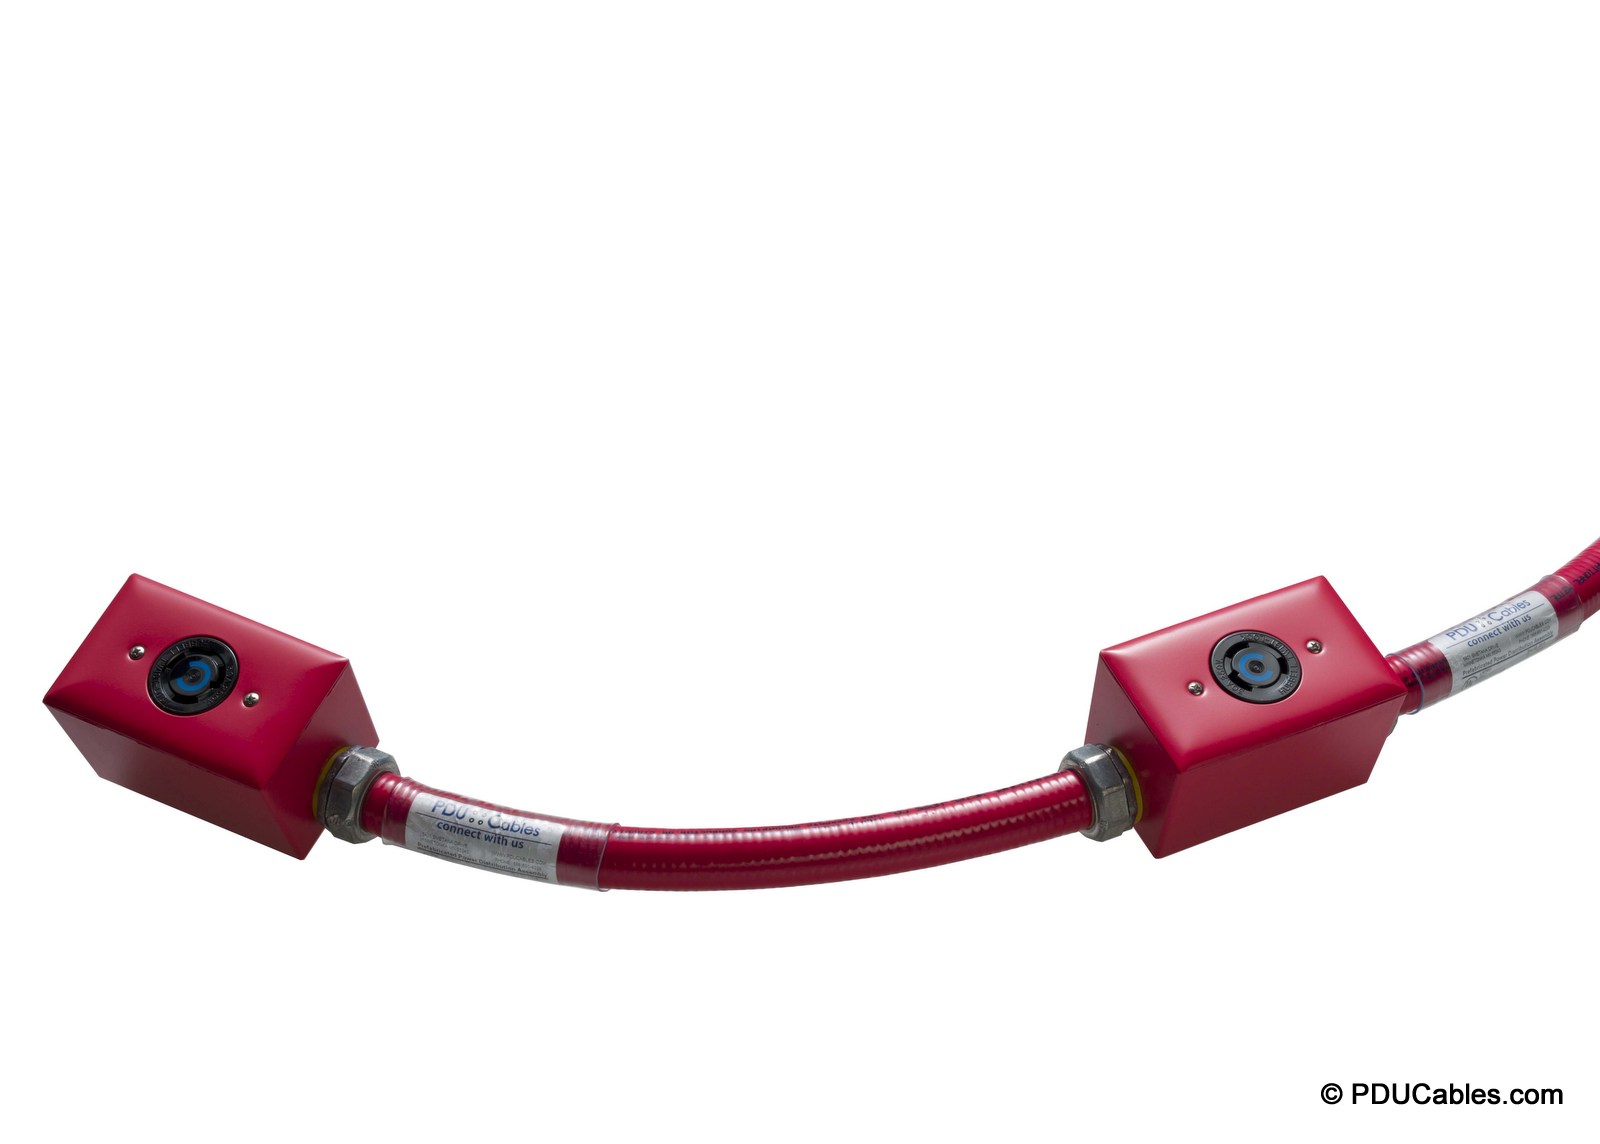 Red daisy chain multi-circuit data center power whip with color matched box, faceplate and conduit